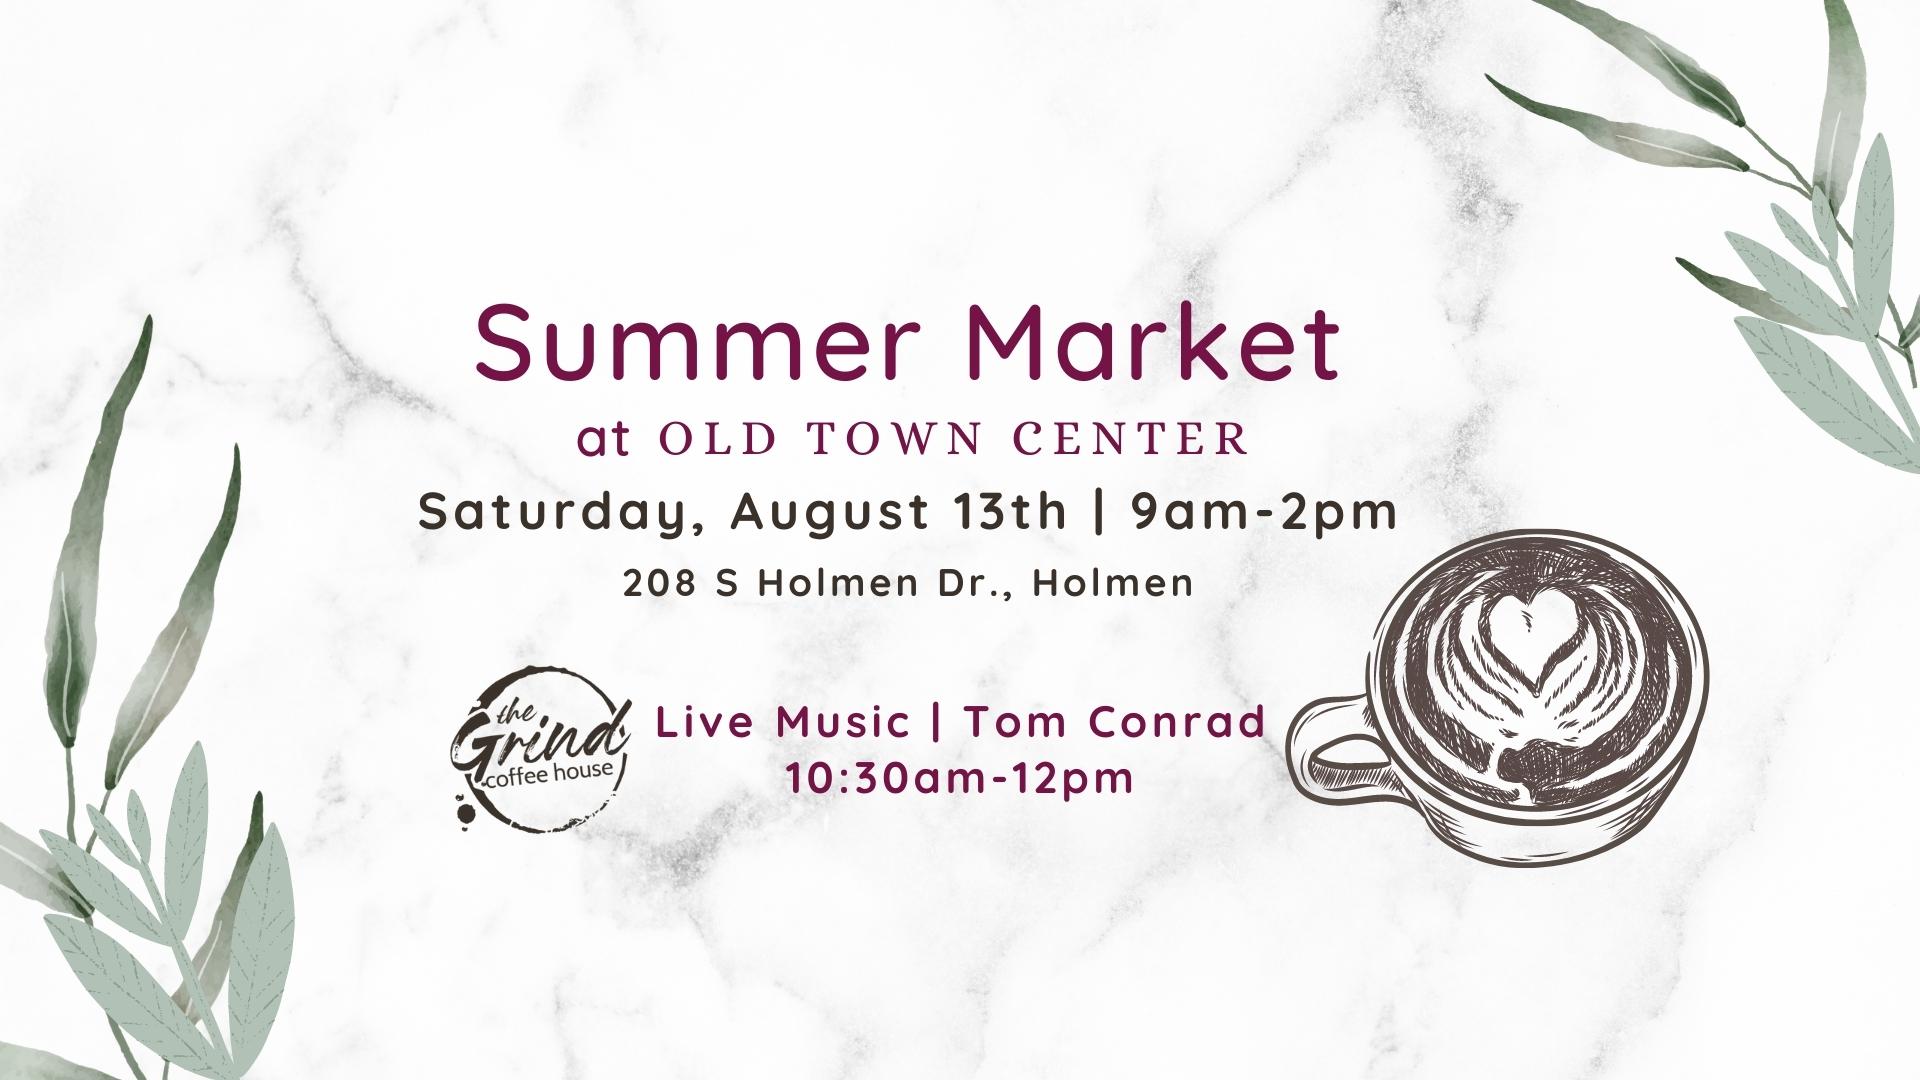 Summer Market at Old Town Center